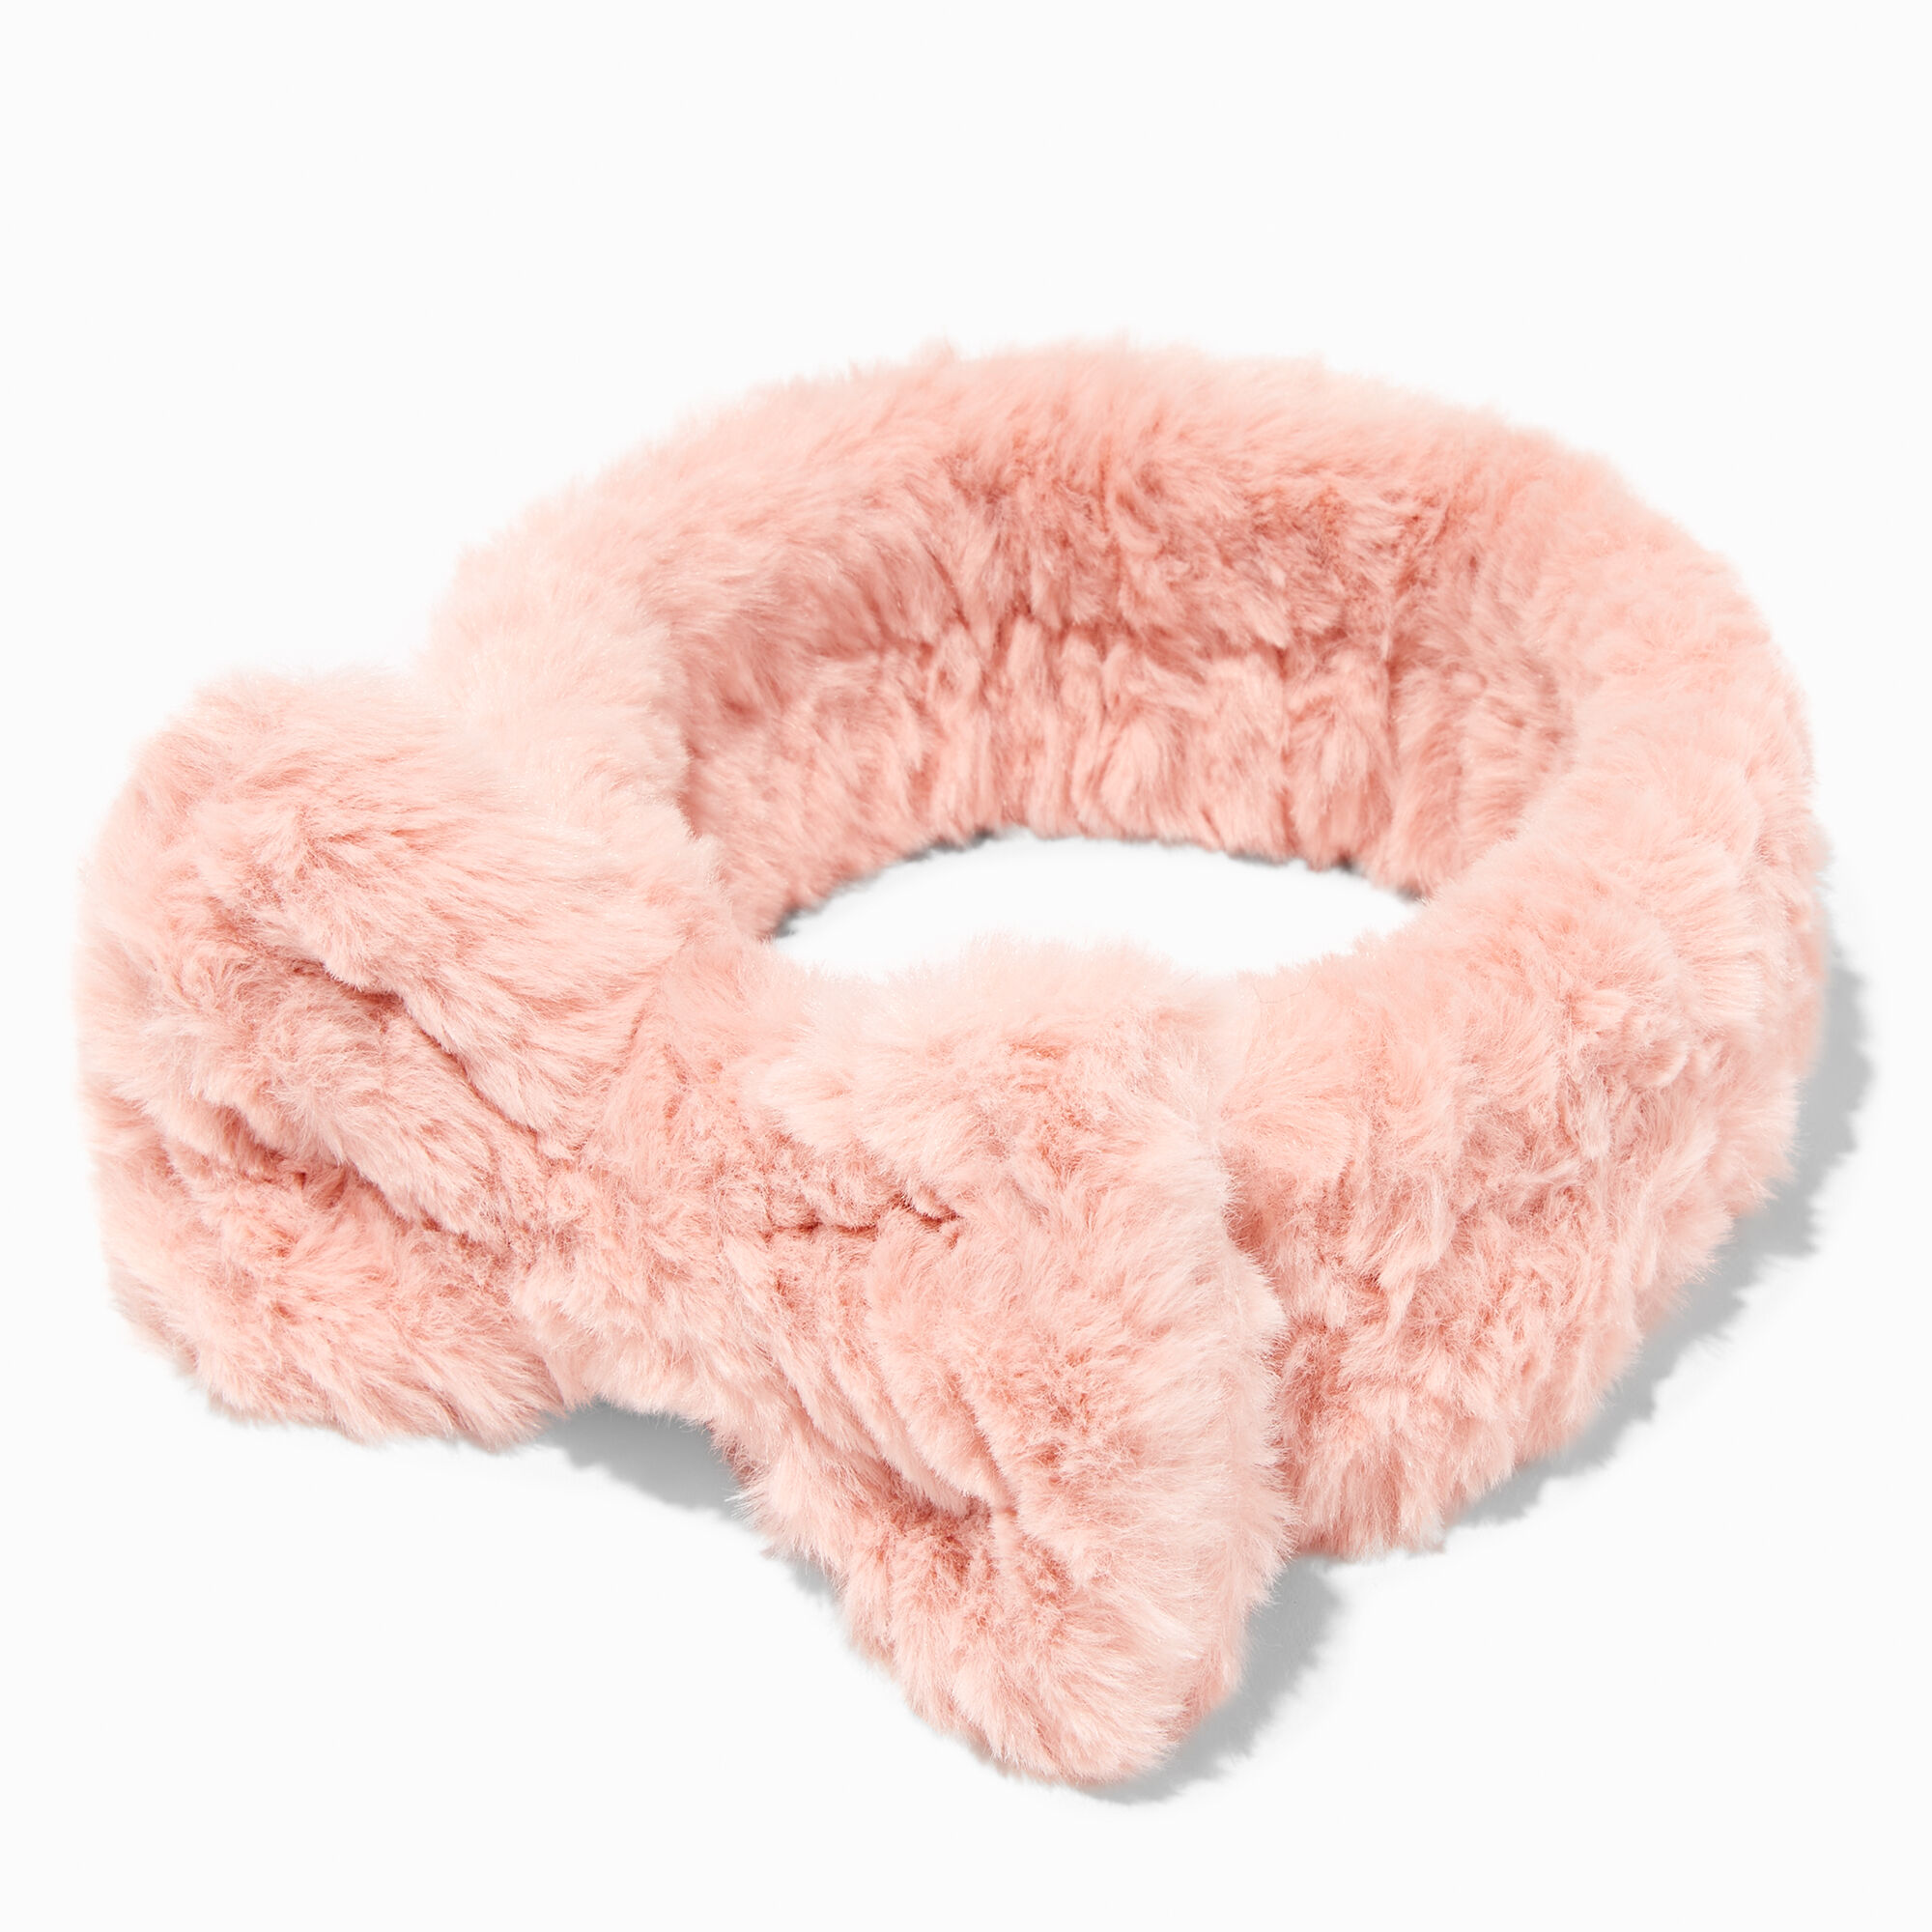 View Claires Furry Makeup Bow Headwrap Pink information